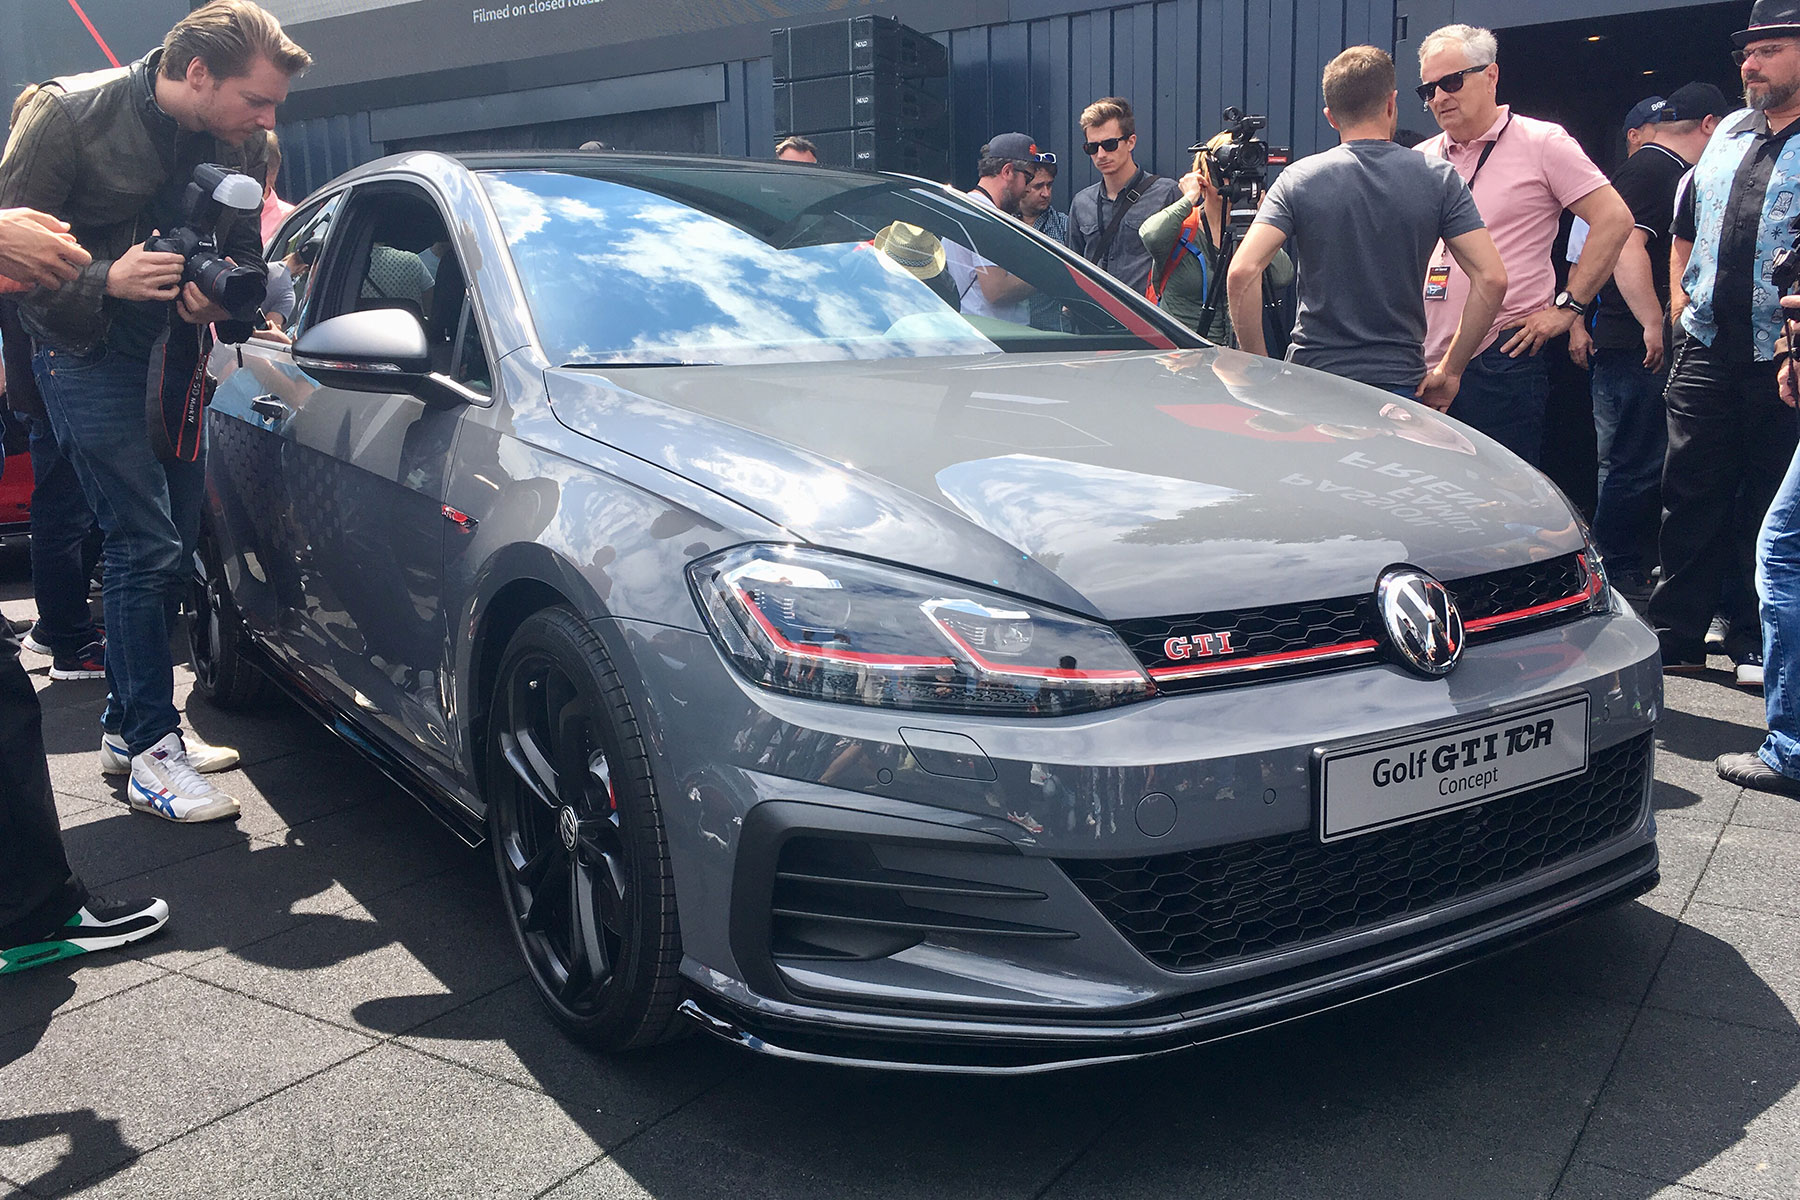 Volkswagen Golf GTE Sport Concept Unveiled At Wörthersee - The Car Guide